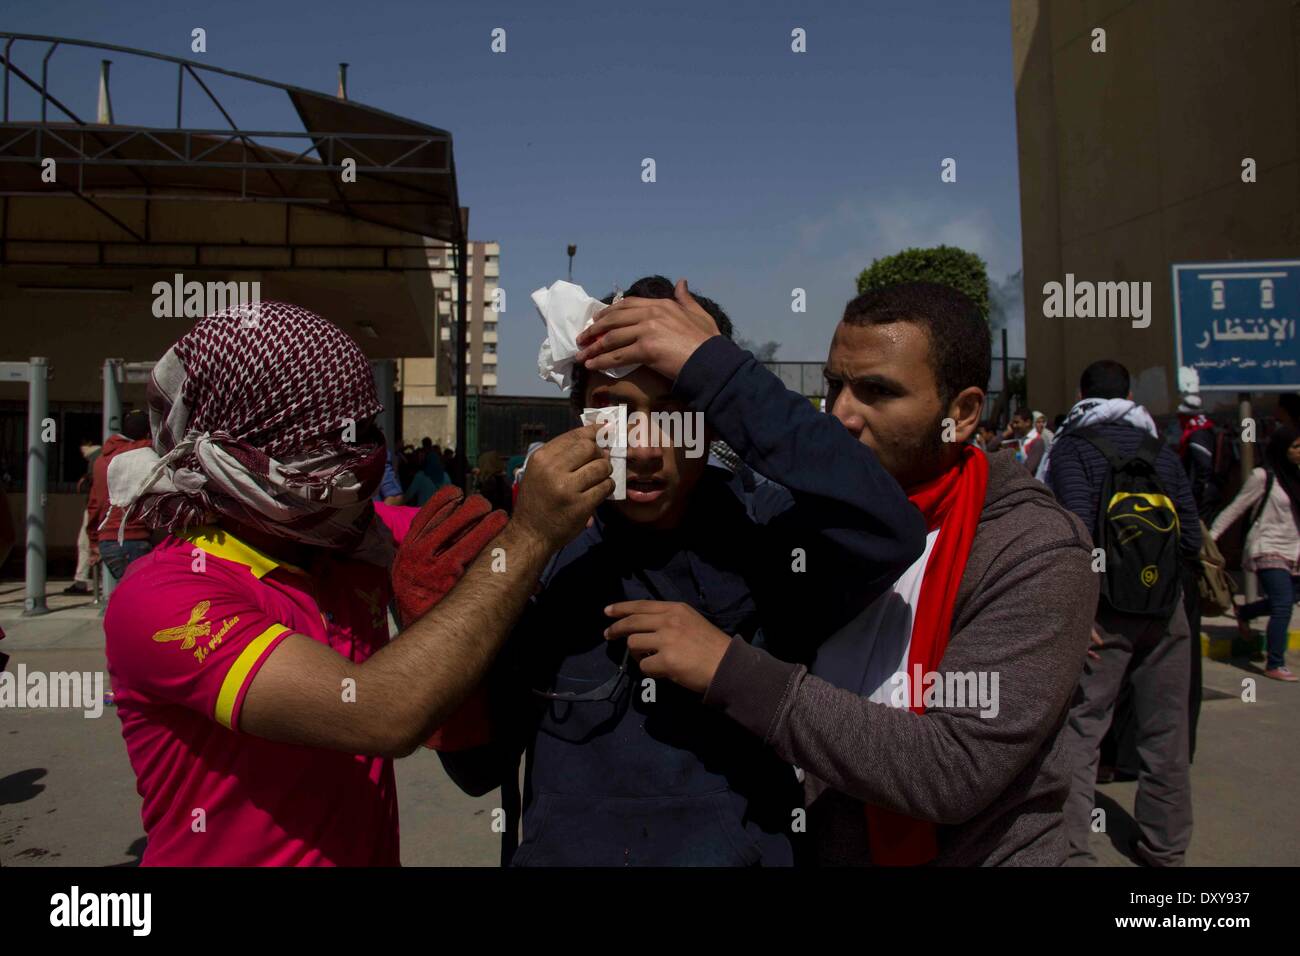 Cairo, Egypt. 1st Apr, 2014. An injured student is taken care by his peers in the Ain Shams University in Cairo, capital of Egypt, April 1, 2014. Clashes erupted between security forces and anti-military students on the university campus here on Tuesday. Credit:  Mustapha Elsayed/Xinhua/Alamy Live News Stock Photo